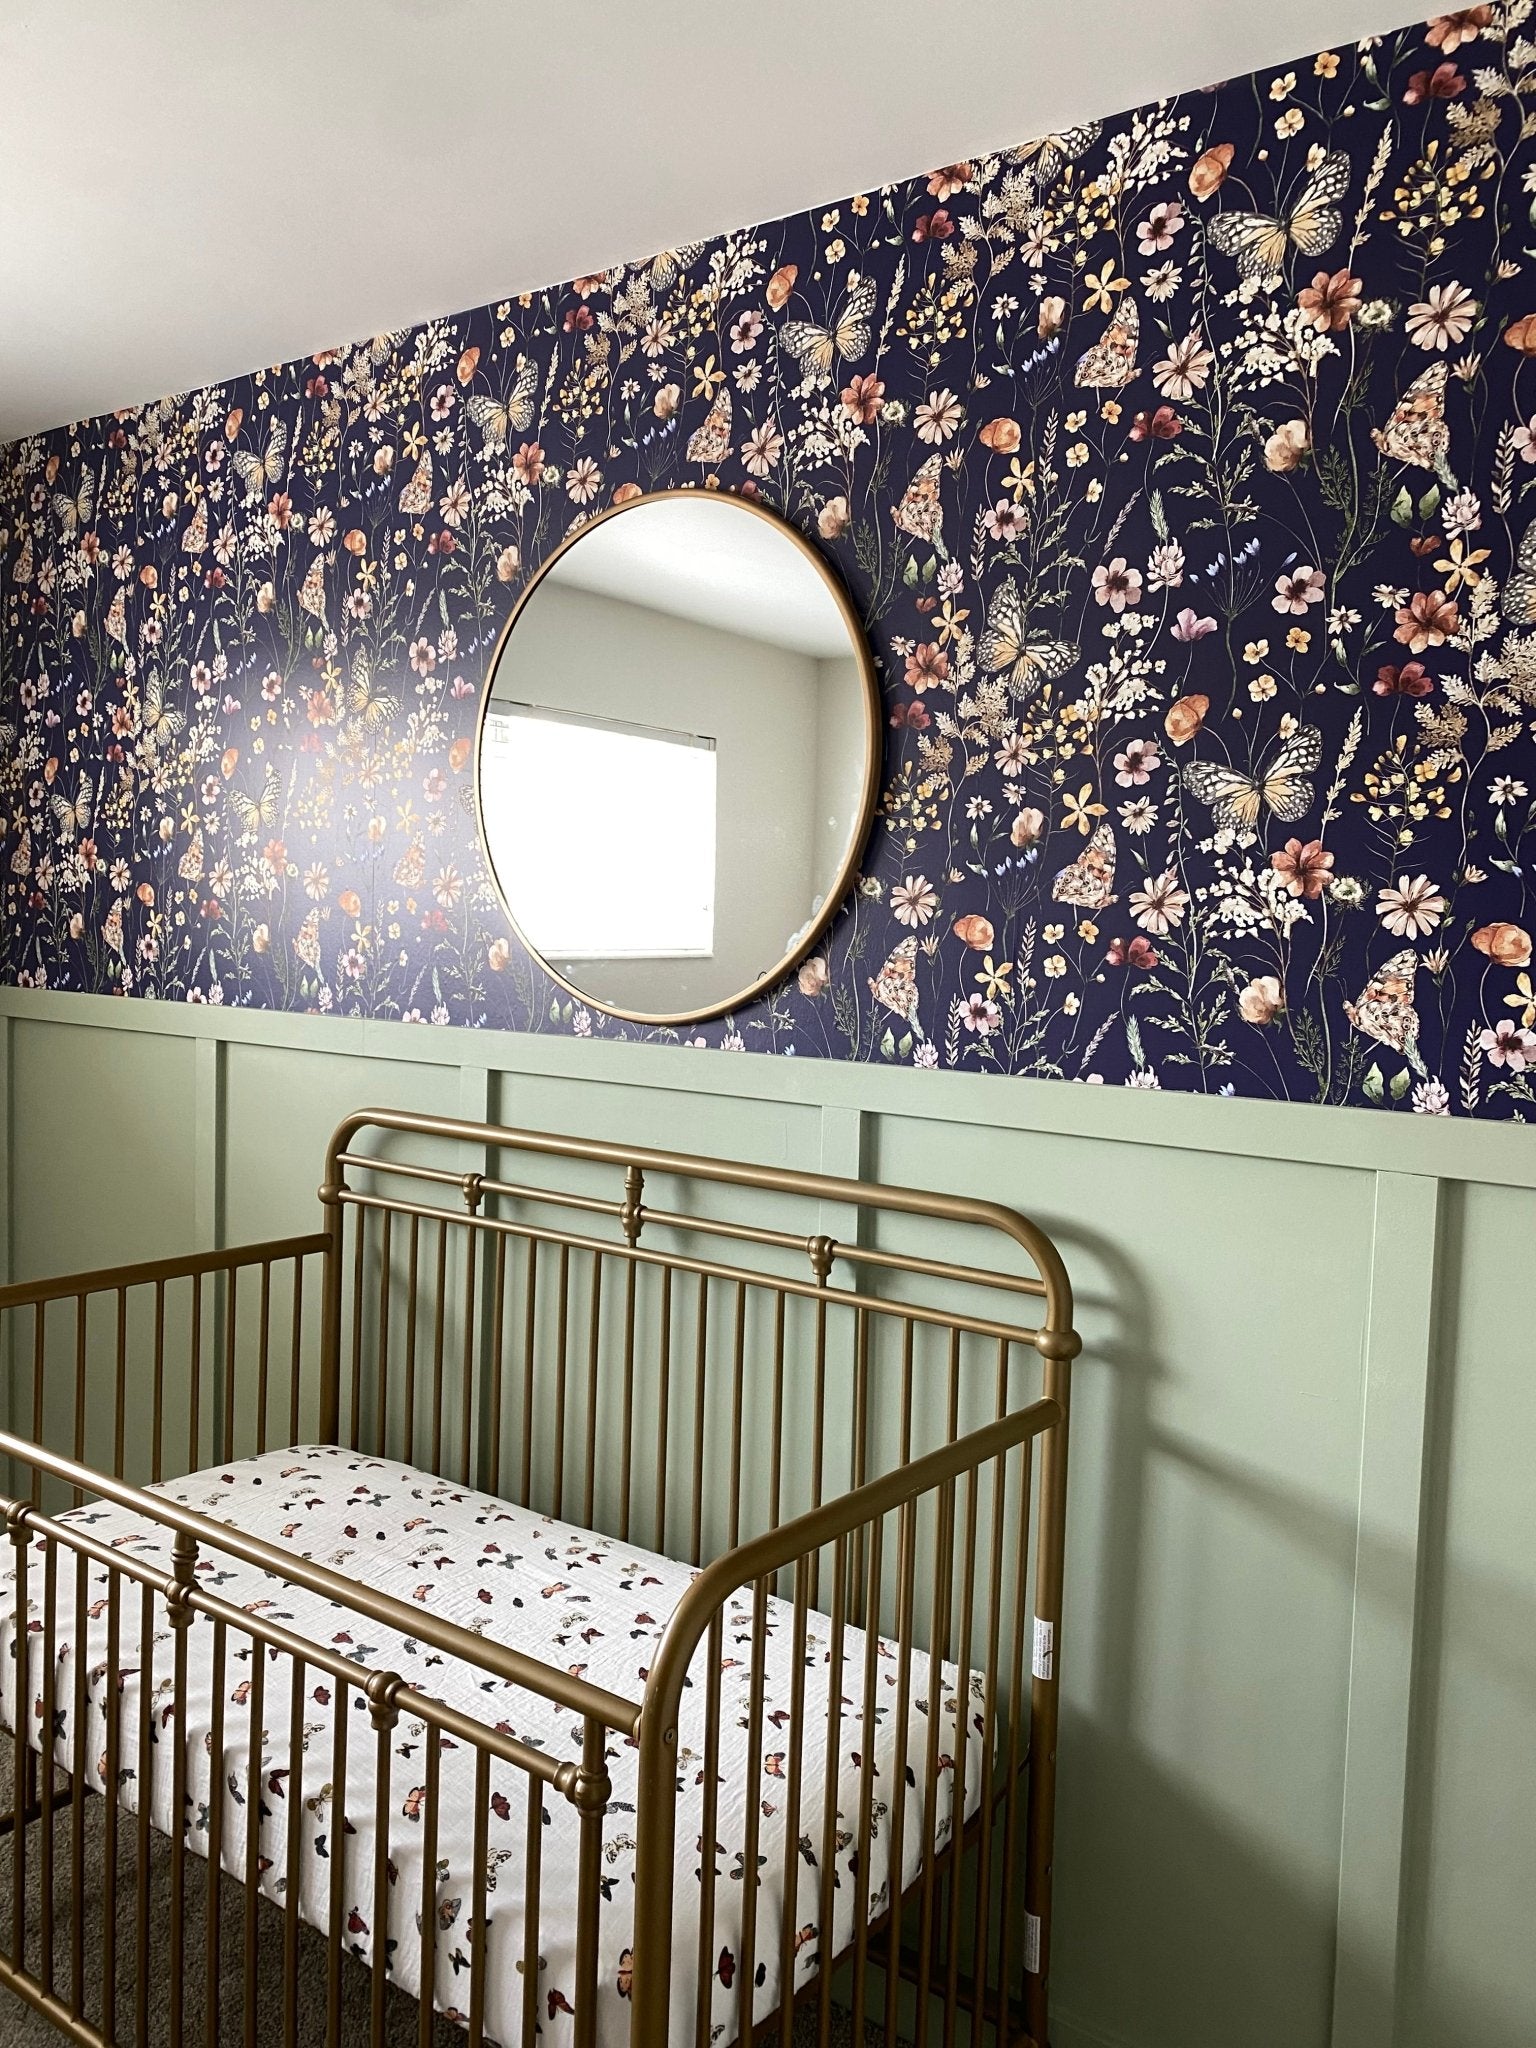 Nursery displaying the entire brass crib, navy blue butterfly wallpaper, and the reflective circular mirror mounted above